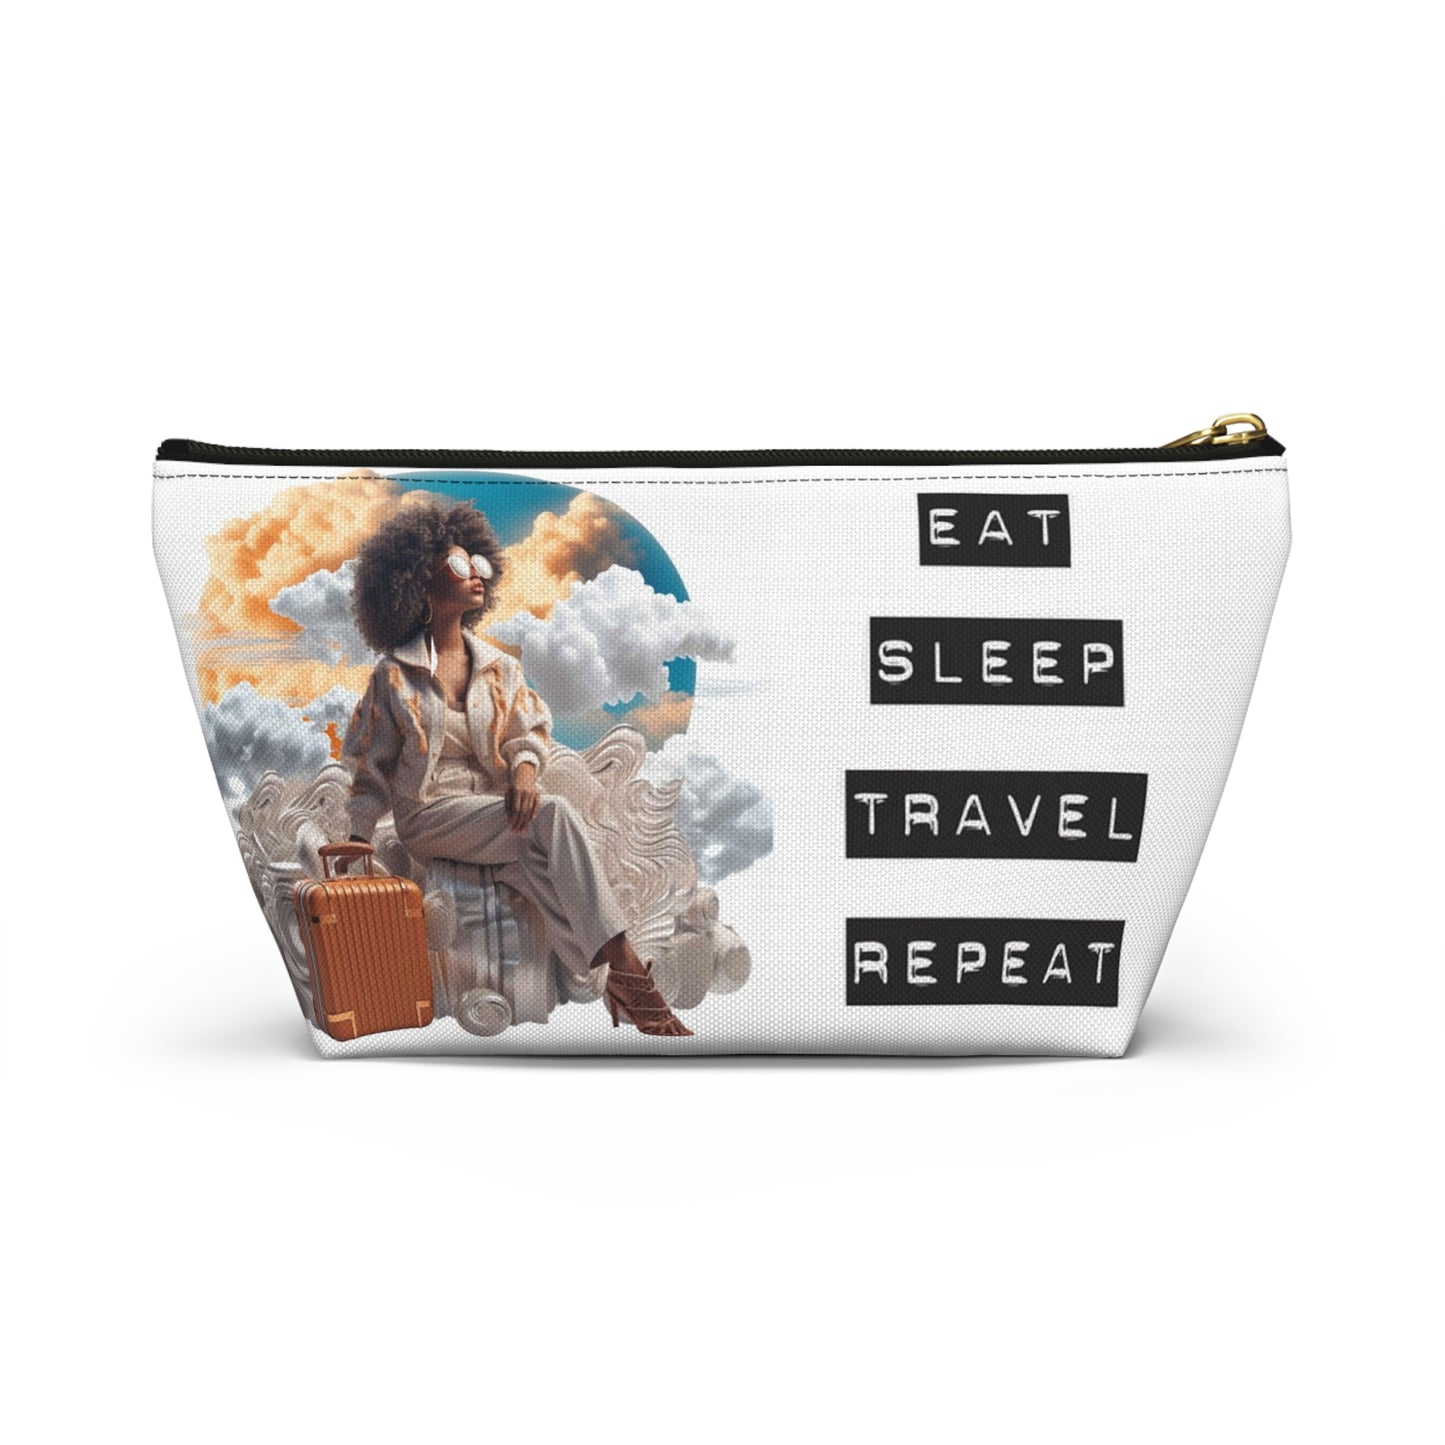 Travel-Ready Accessory Pouch with Inspiring Designs (EAT, SLEEP, TRAVEL, REPEAT)